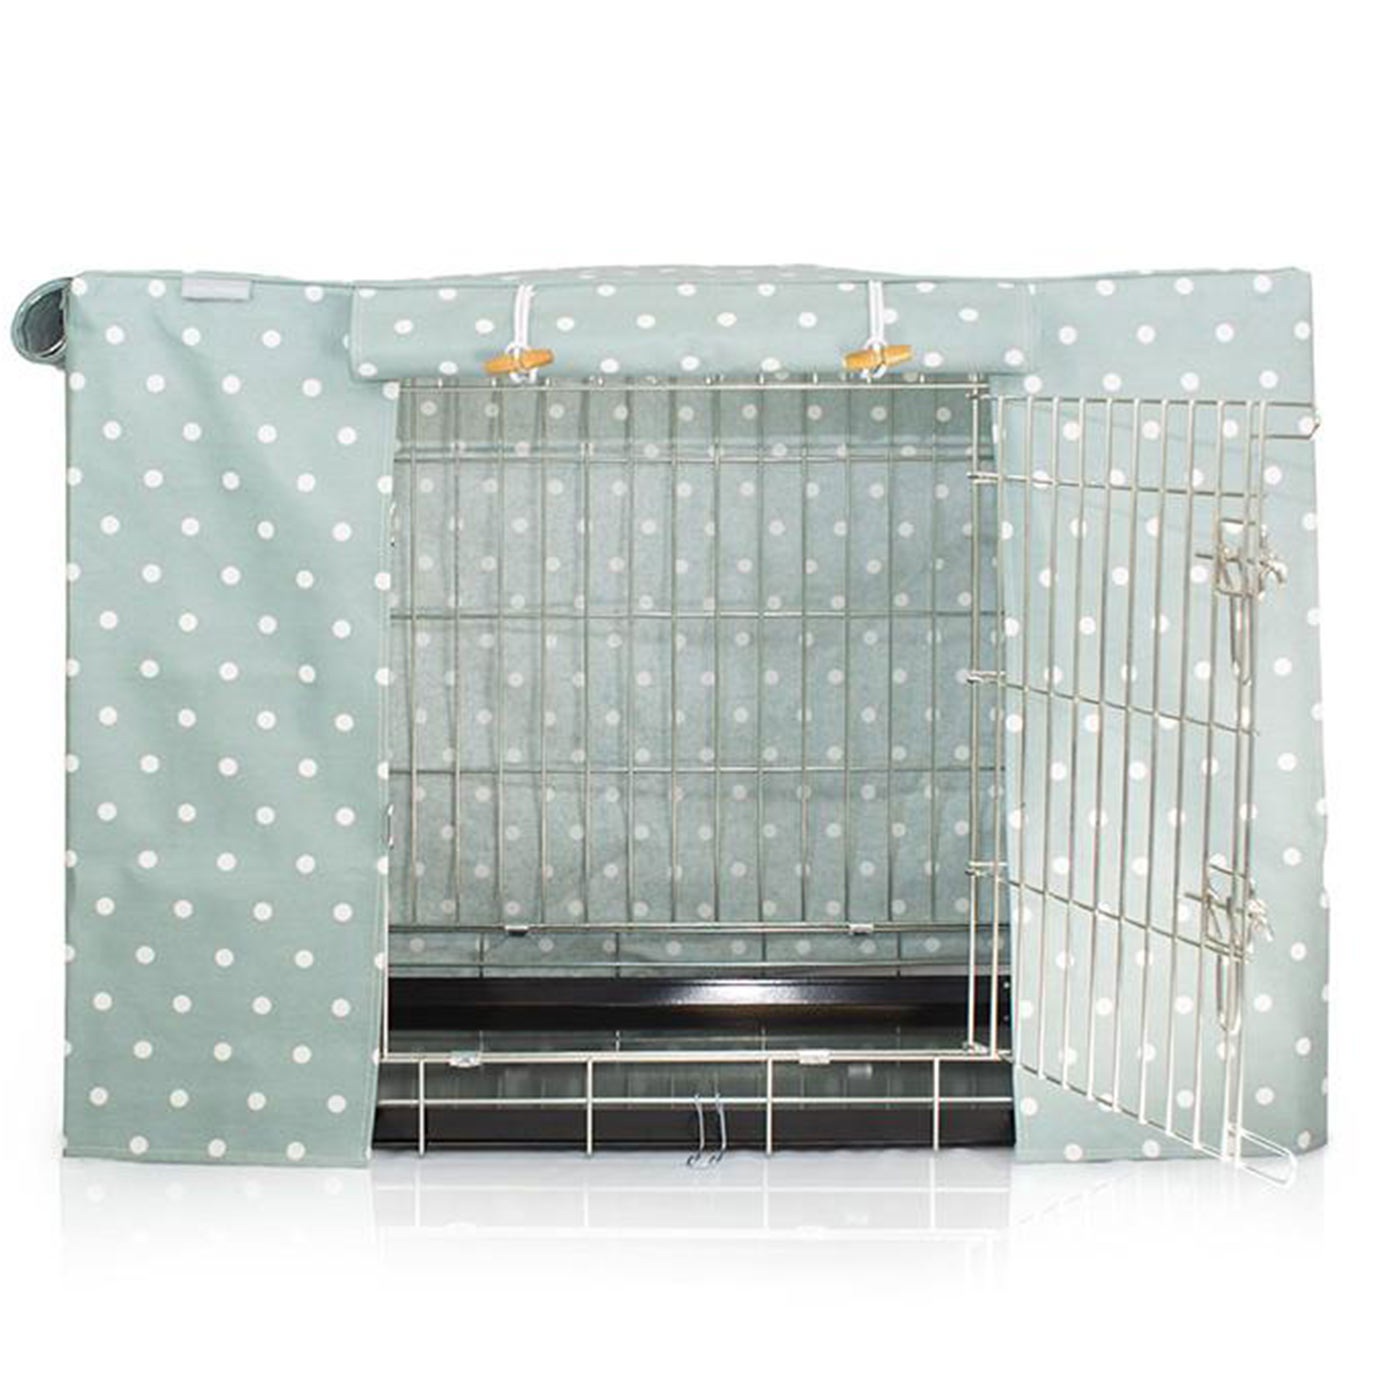 Discover Our Heavy-Duty Dog Cage With Duck Egg Spot Oil Cloth Cage Cover! The Perfect Crate Accessory For The Ultimate Pet Den at Lords & Labradors US